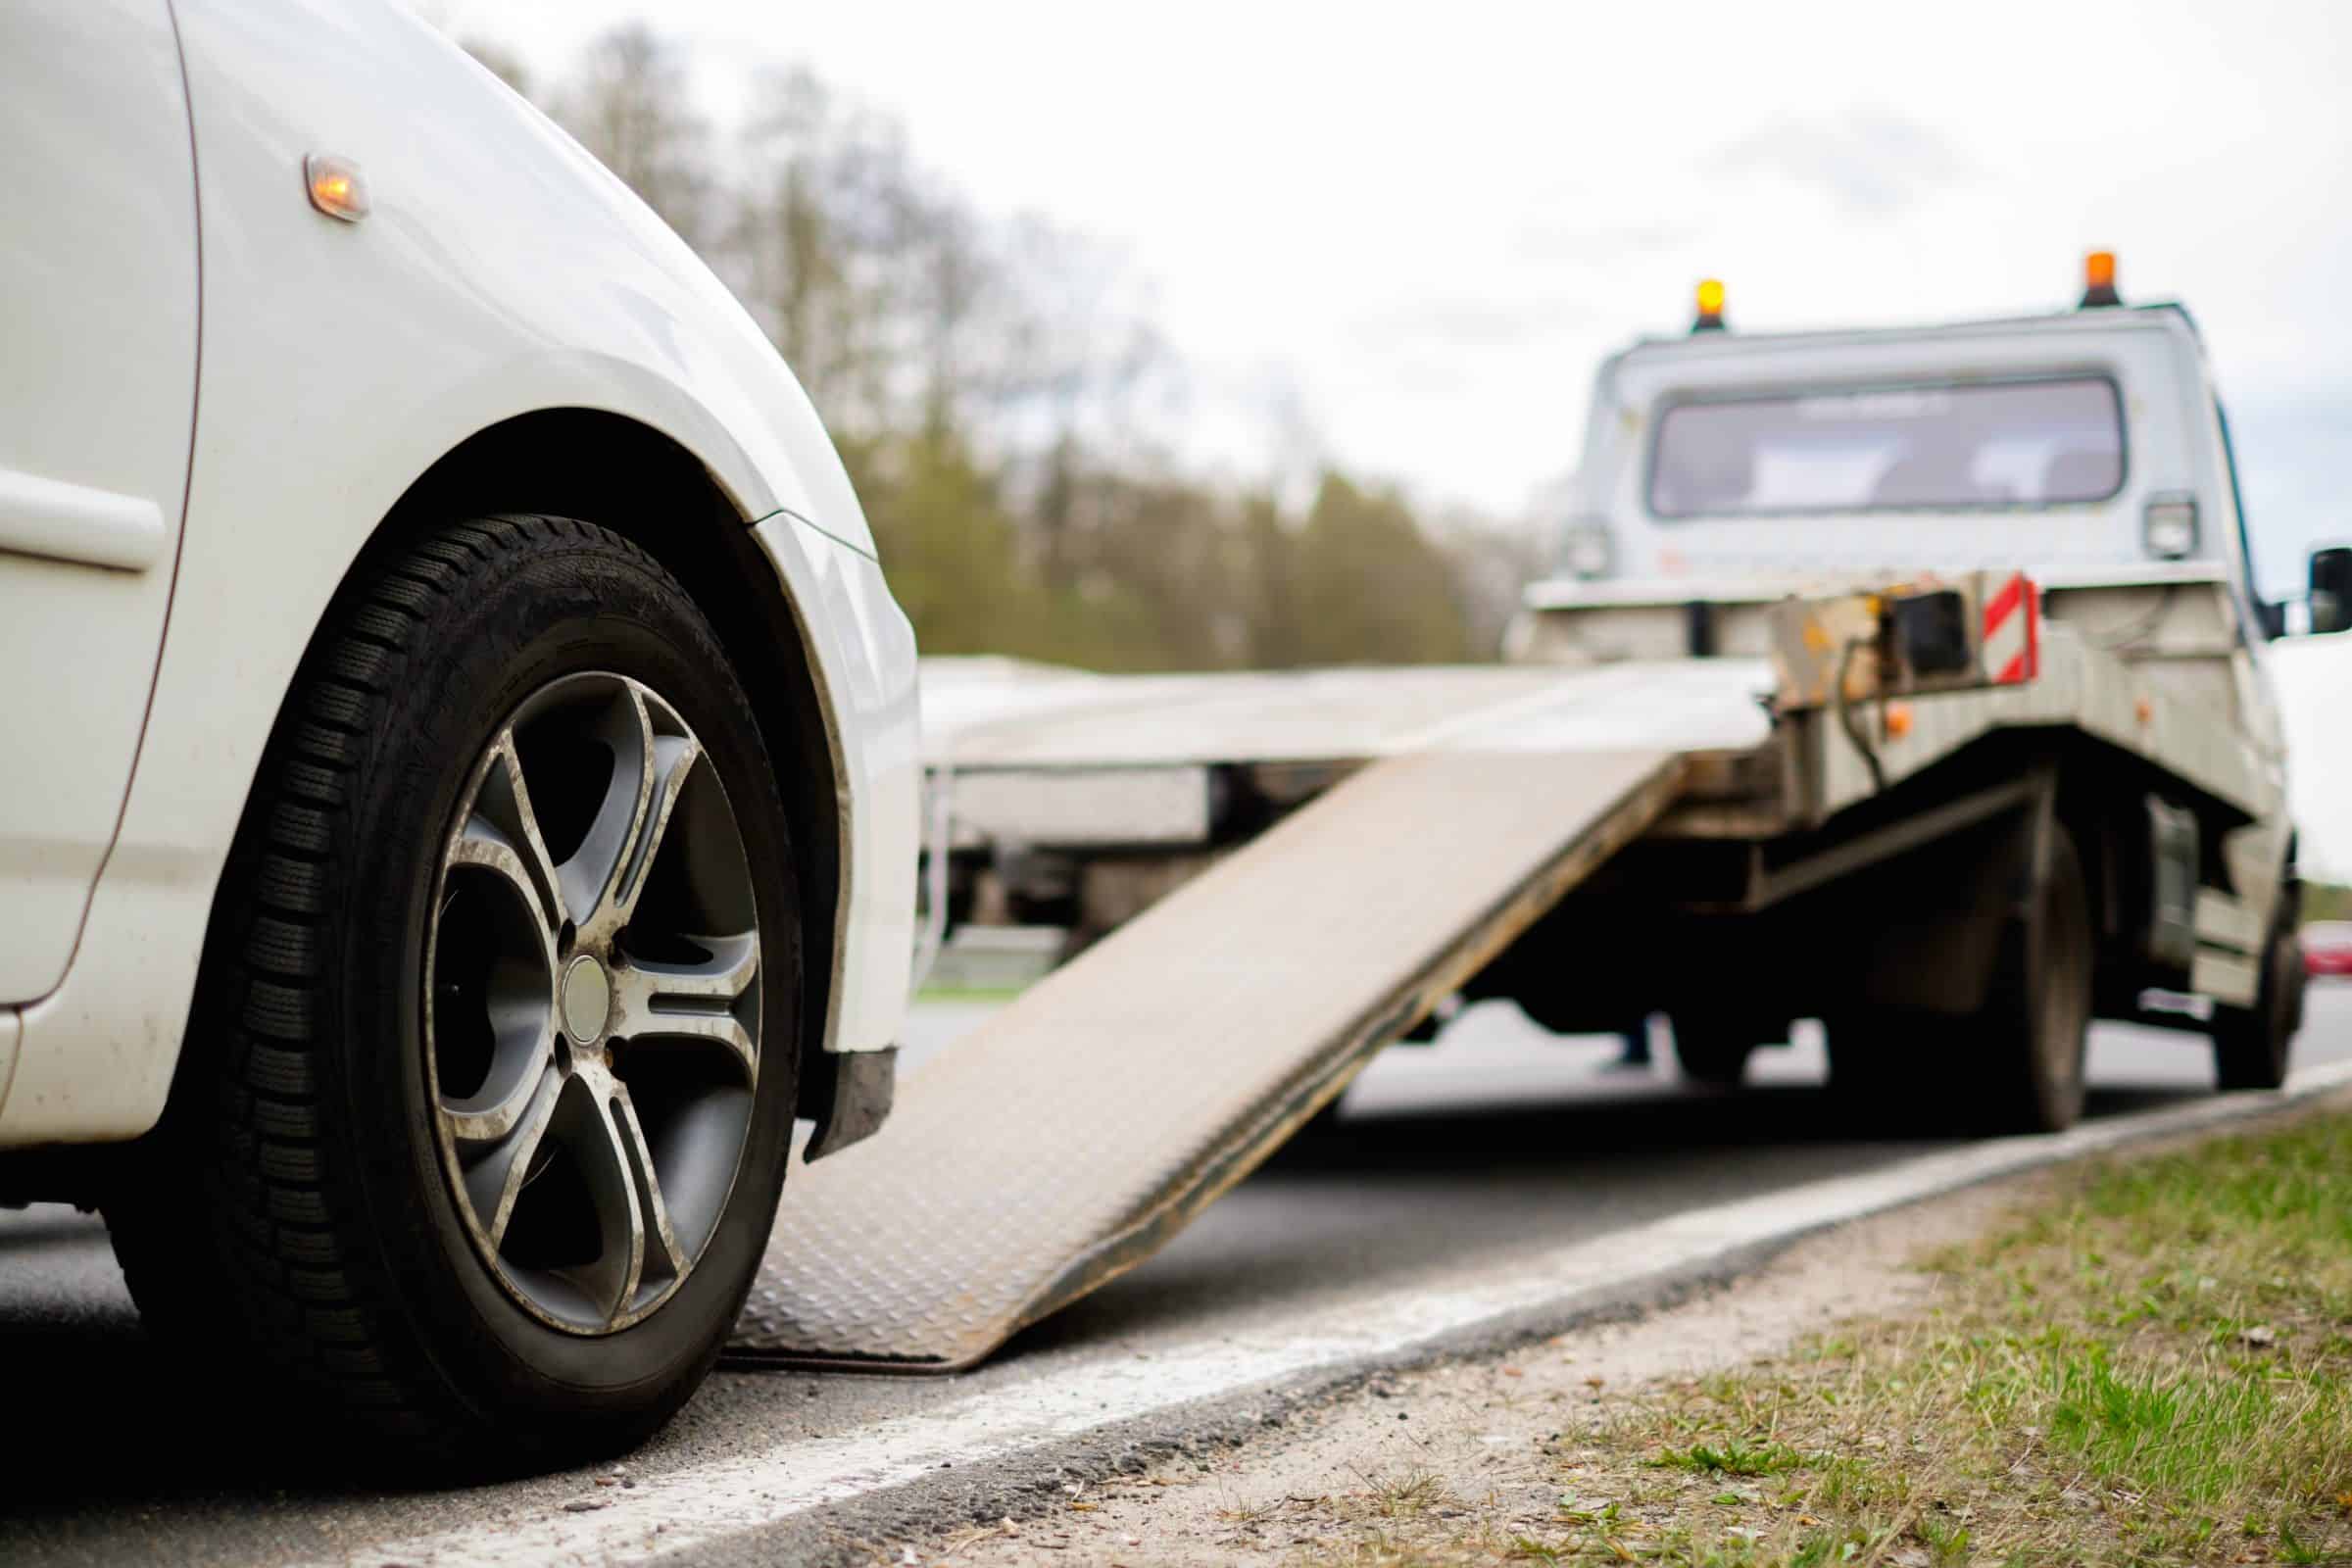 24-Hour Car Towing & Roadside Assistance Services Near You